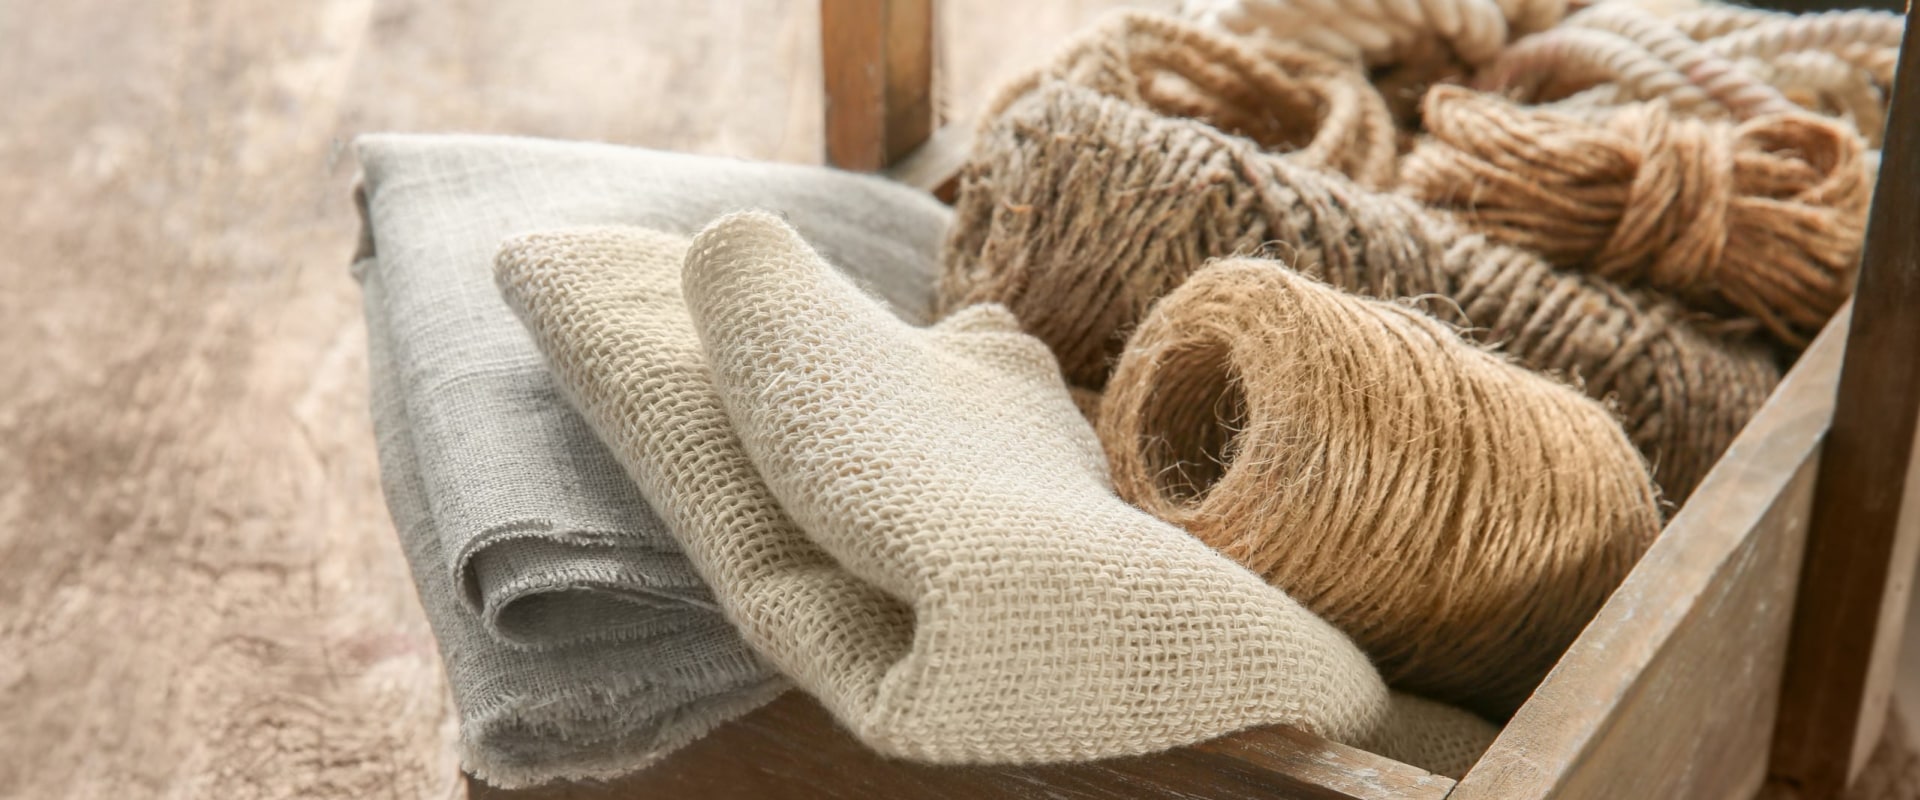 The Benefits of Hemp Clothing: A Comprehensive Guide